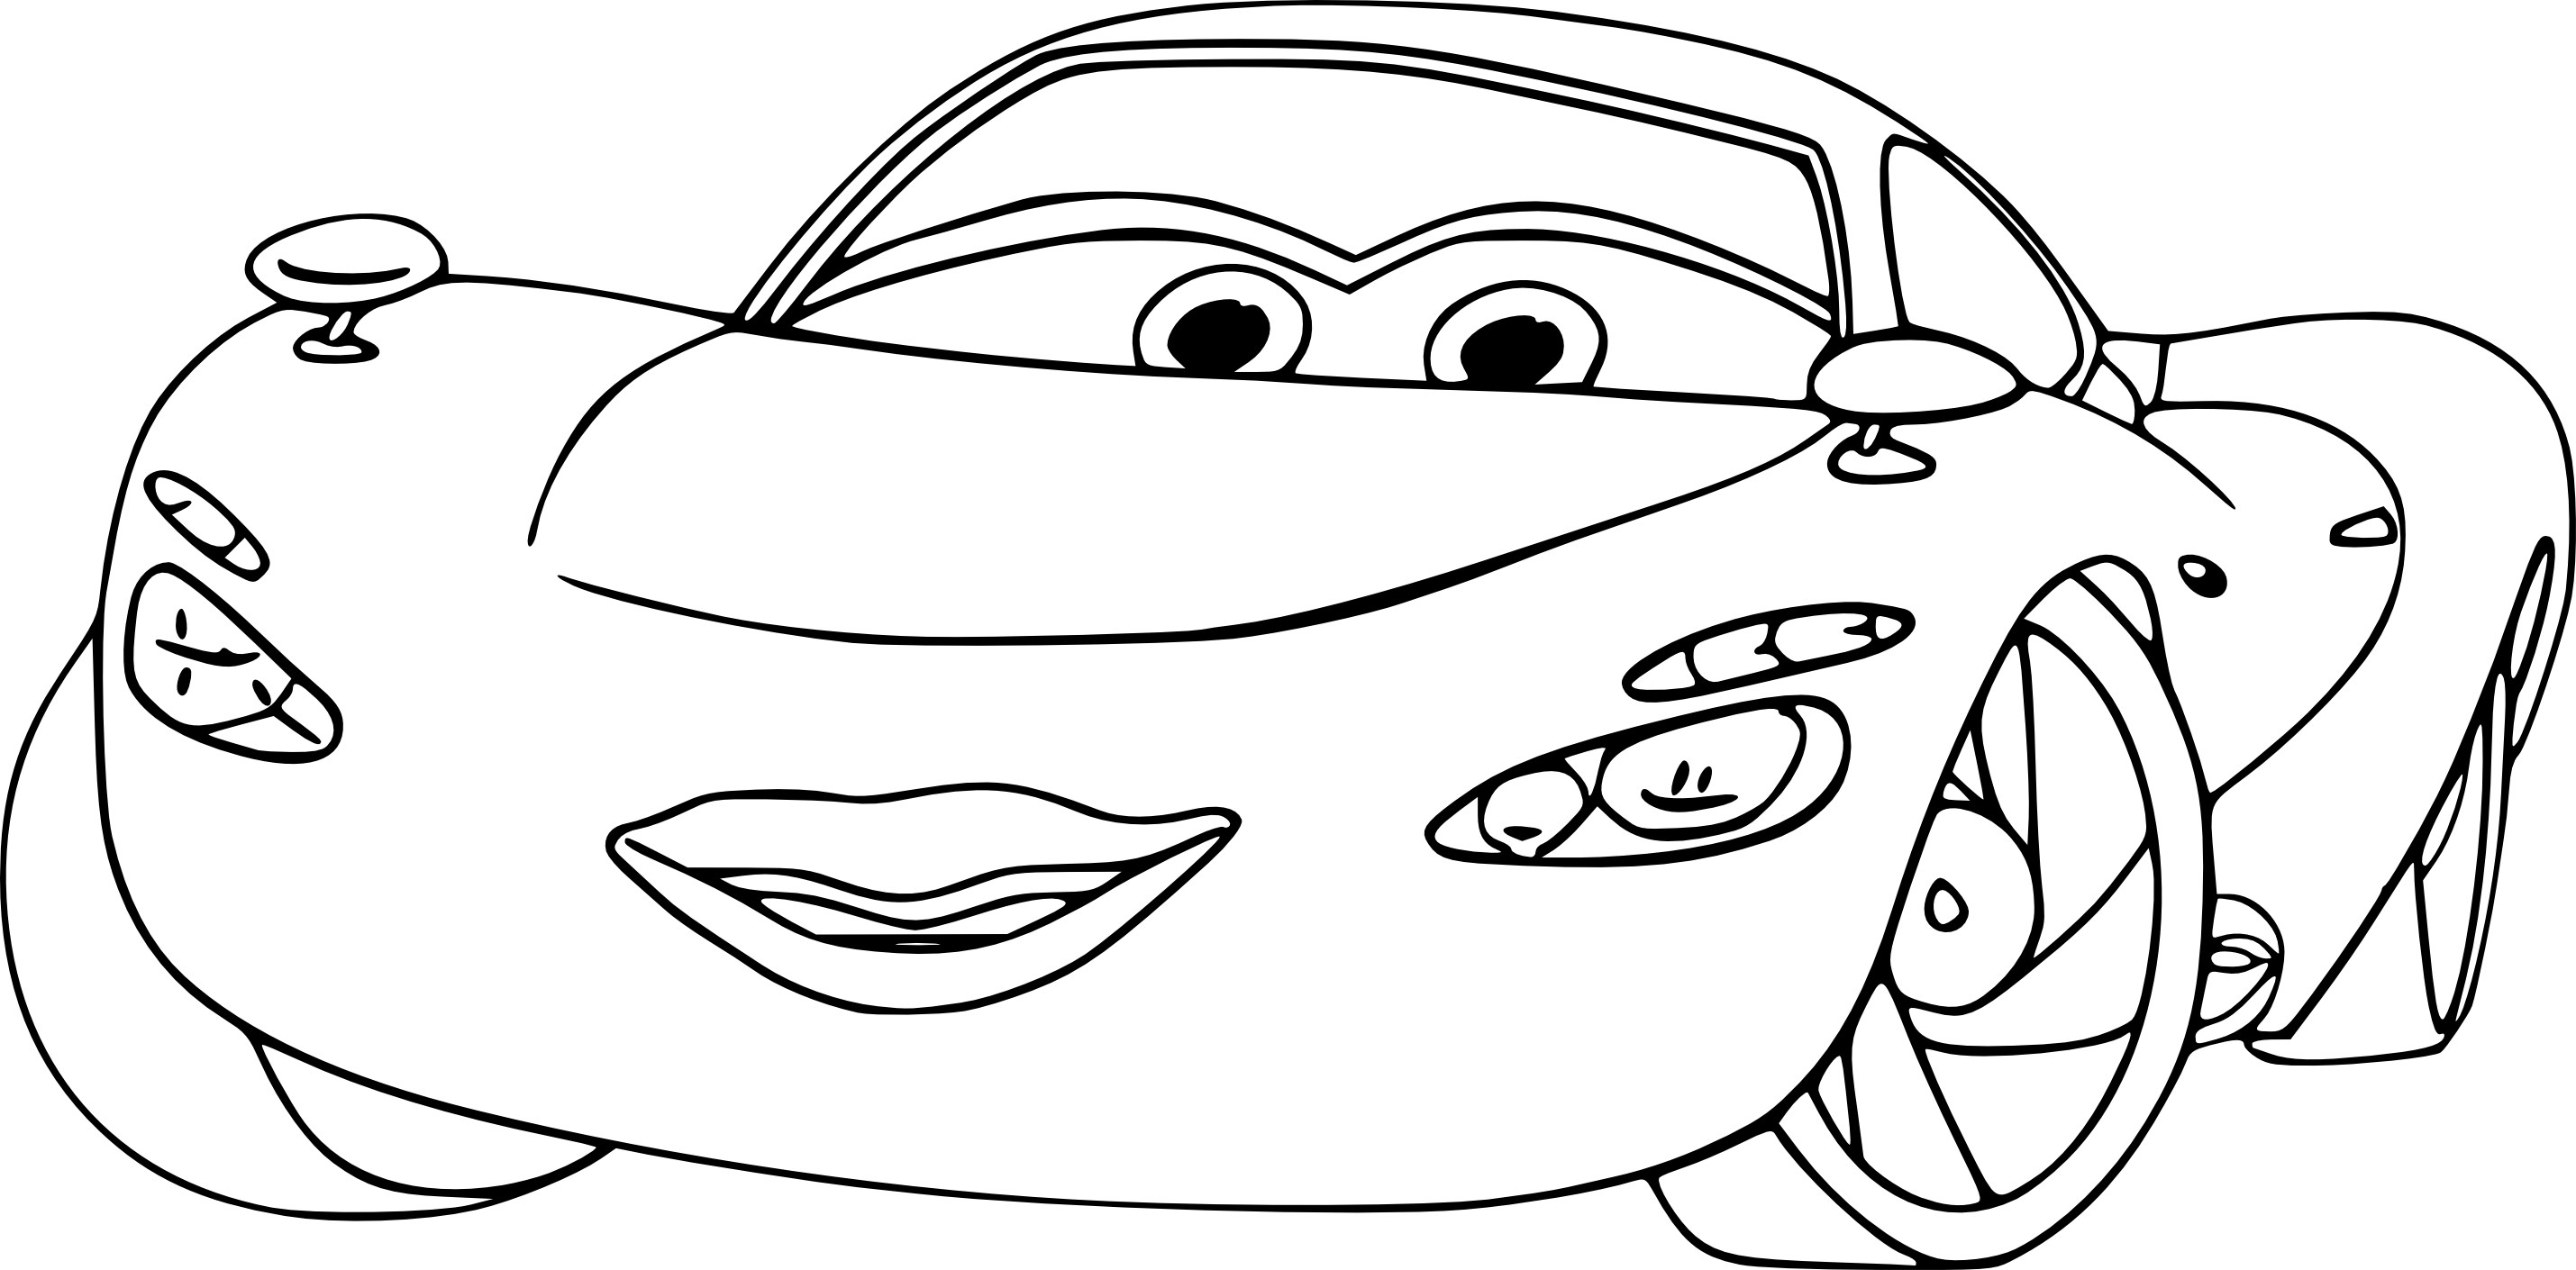 Coloriage Cars Holley Shiftwell Gratuit – Coloriage Cars destiné Dessin A Imprimer Gratuit Cars